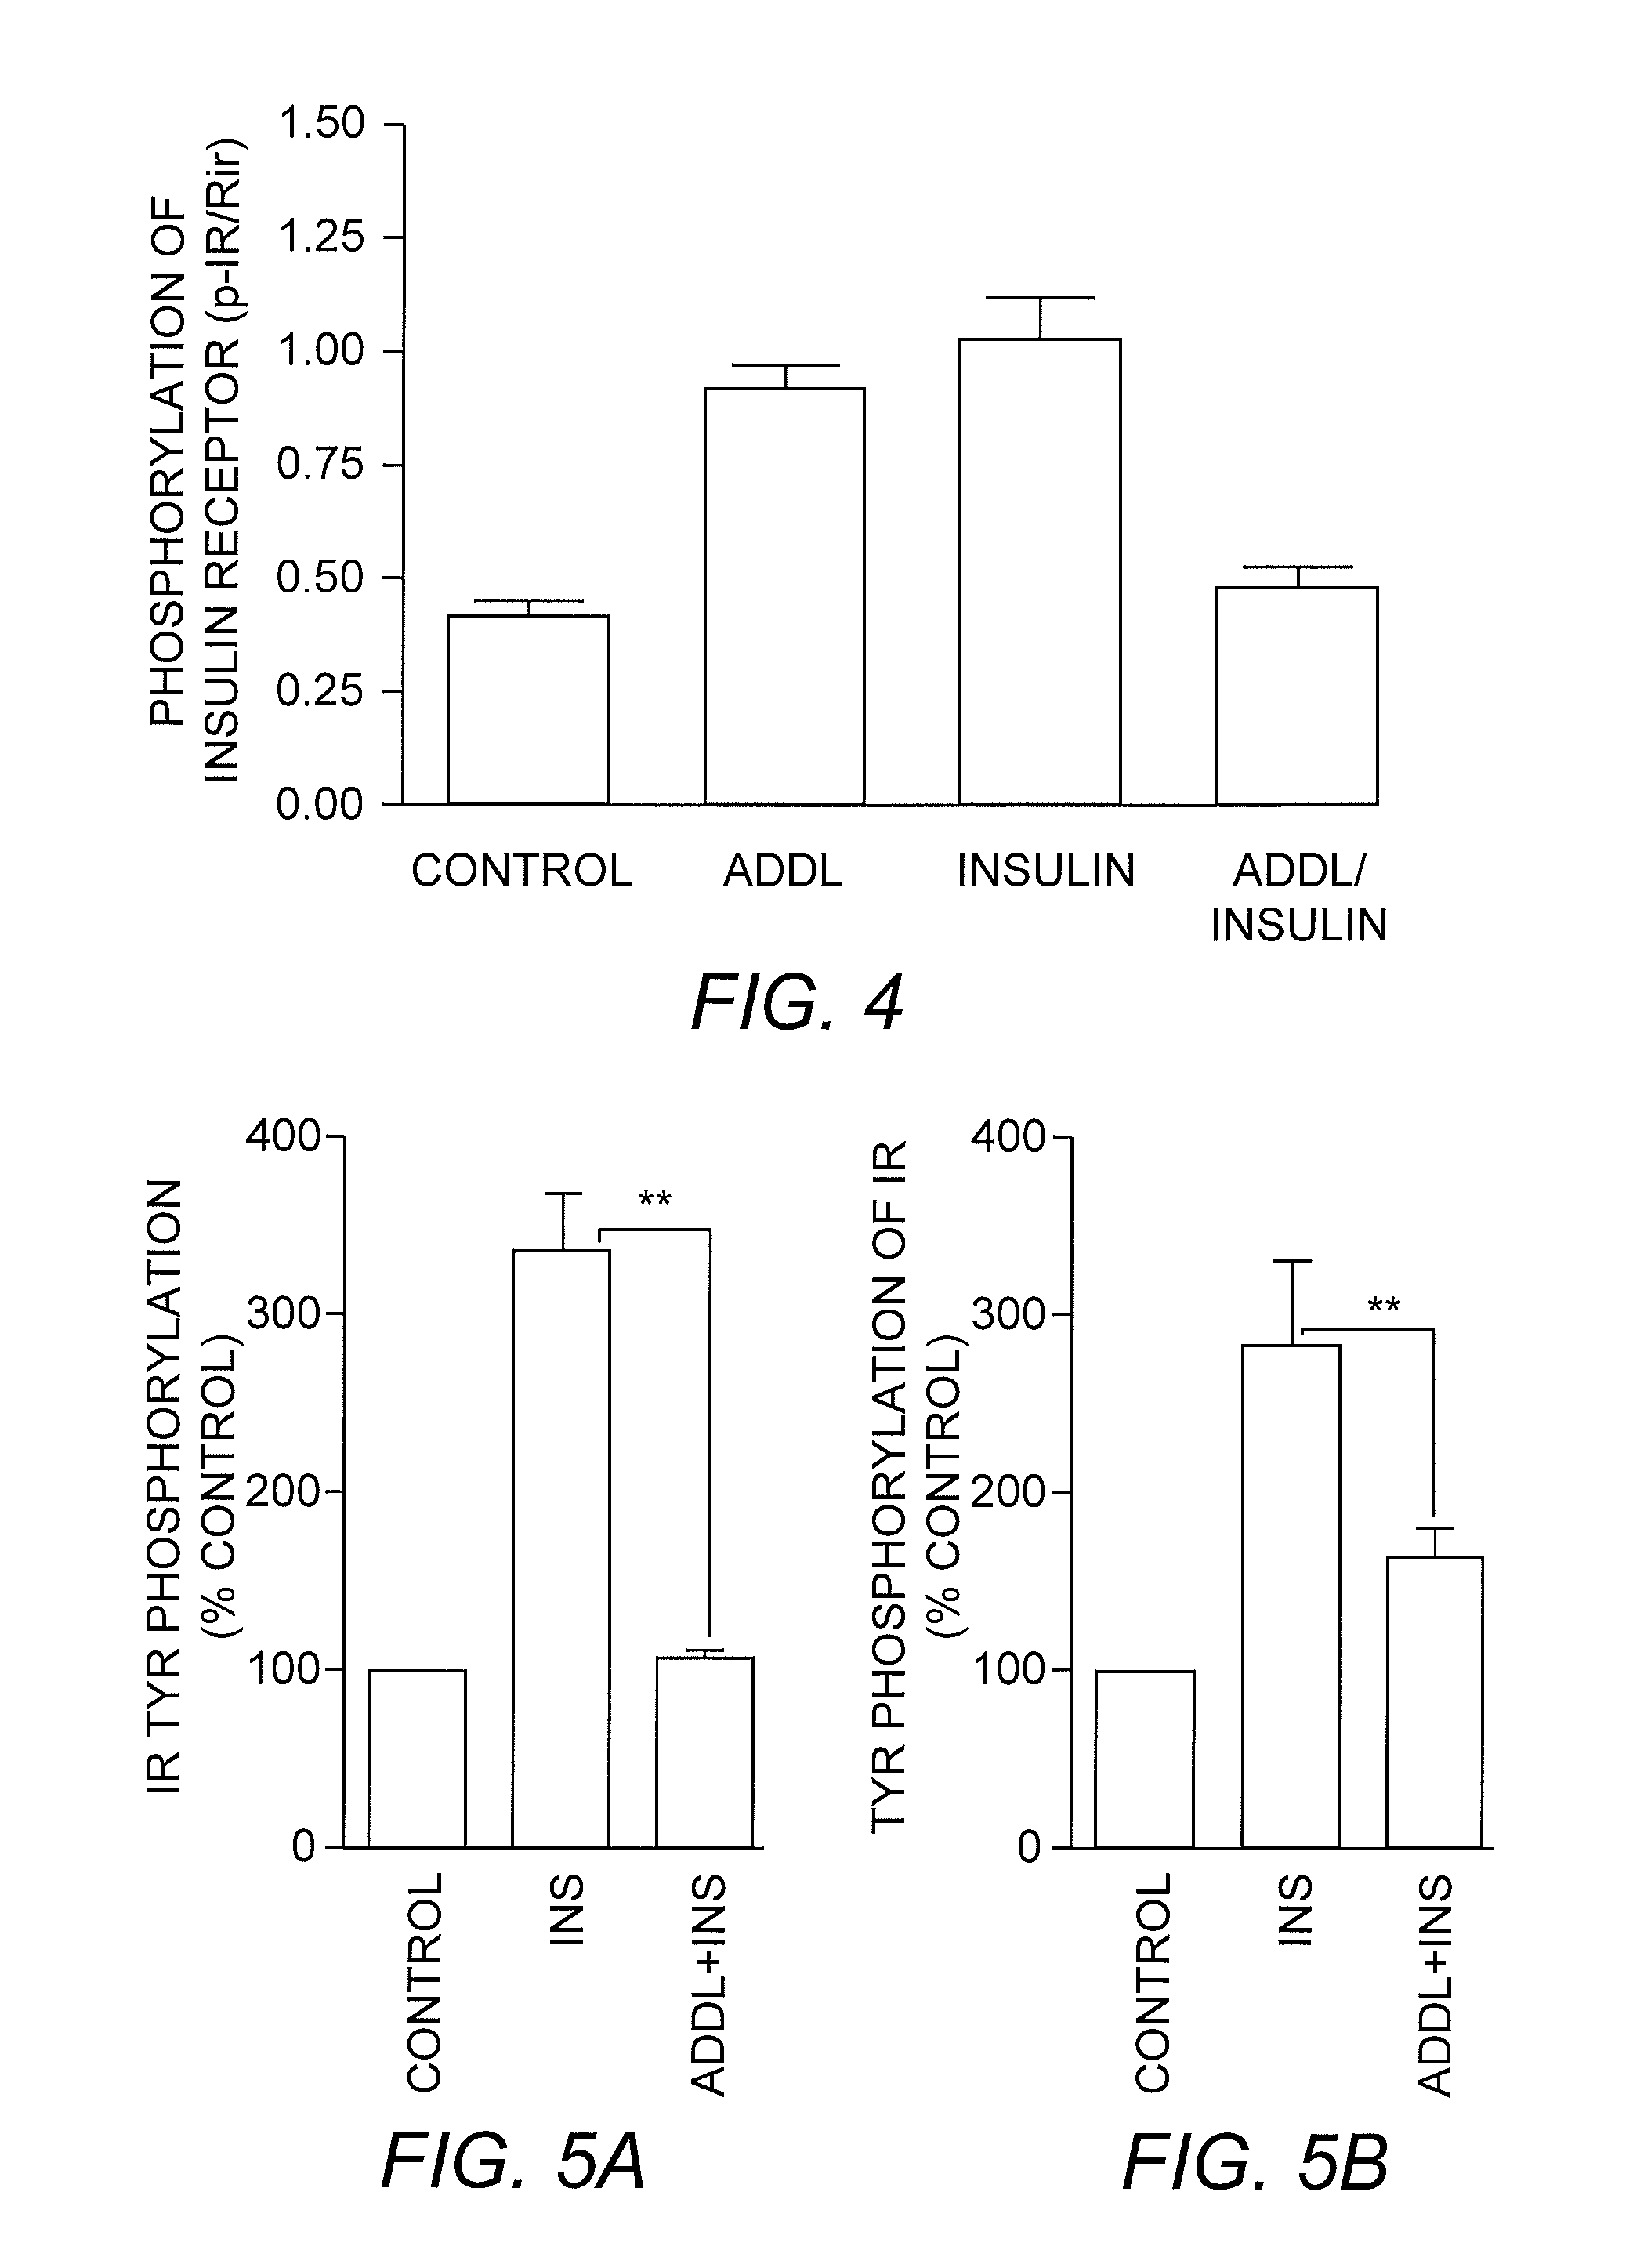 Compositions and methods for the enhancement of soluble amyloid beta oligomer (ADDL) uptake and clearance